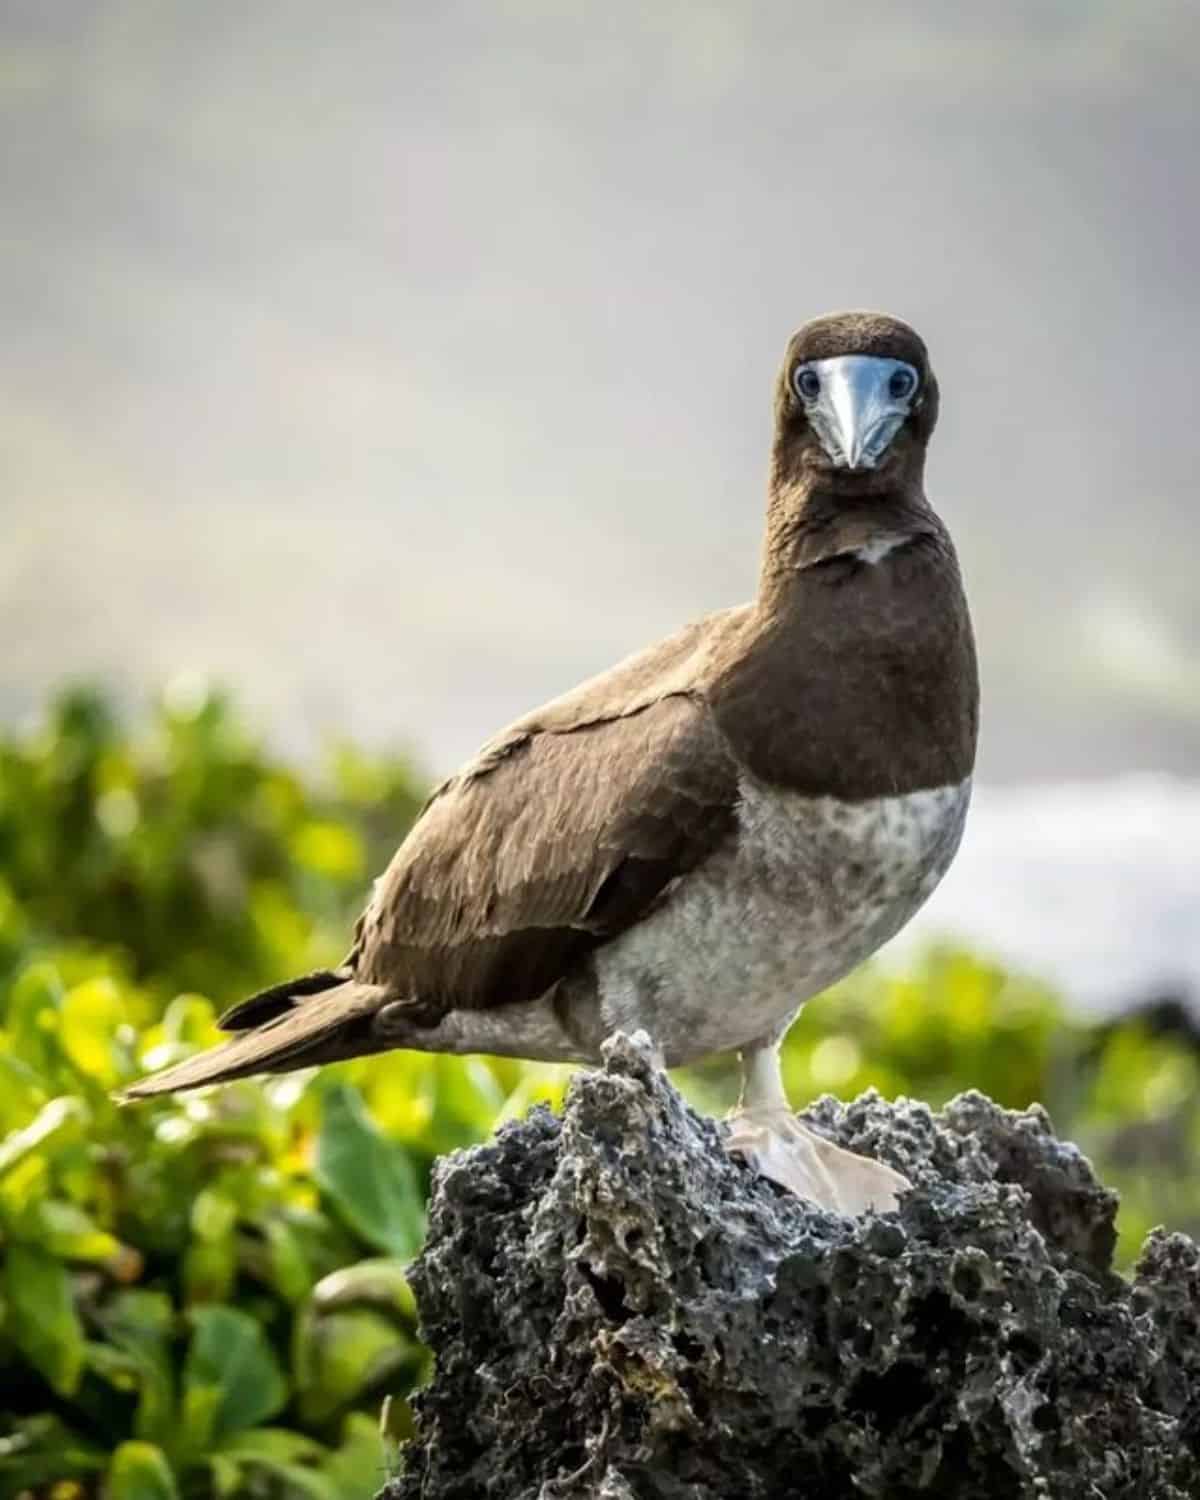 An adorable Booby perched on a rock.